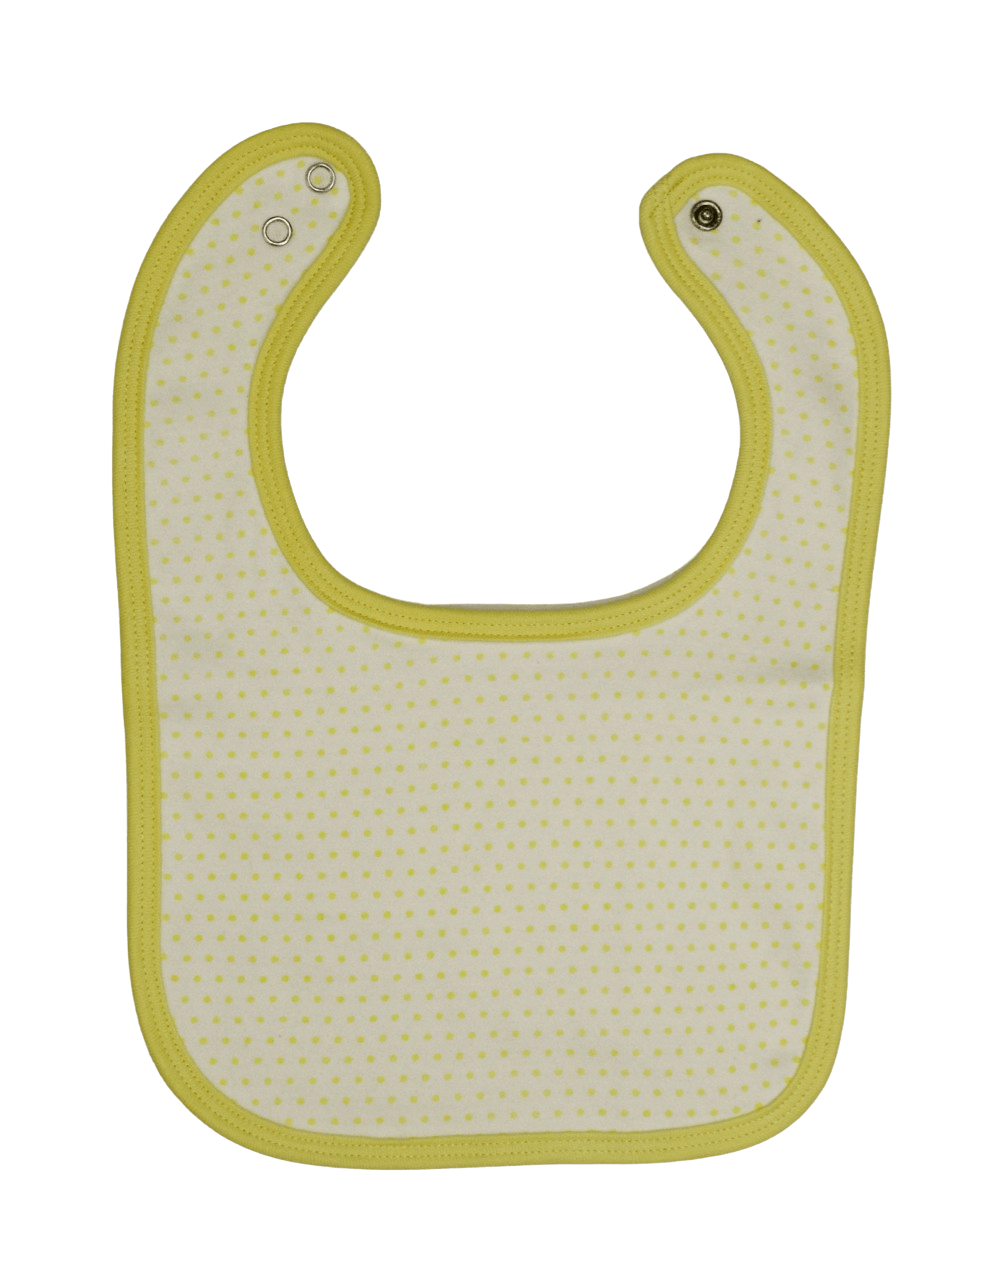 Snap Bib - Available in 4 Colors Passion Lilie - Free